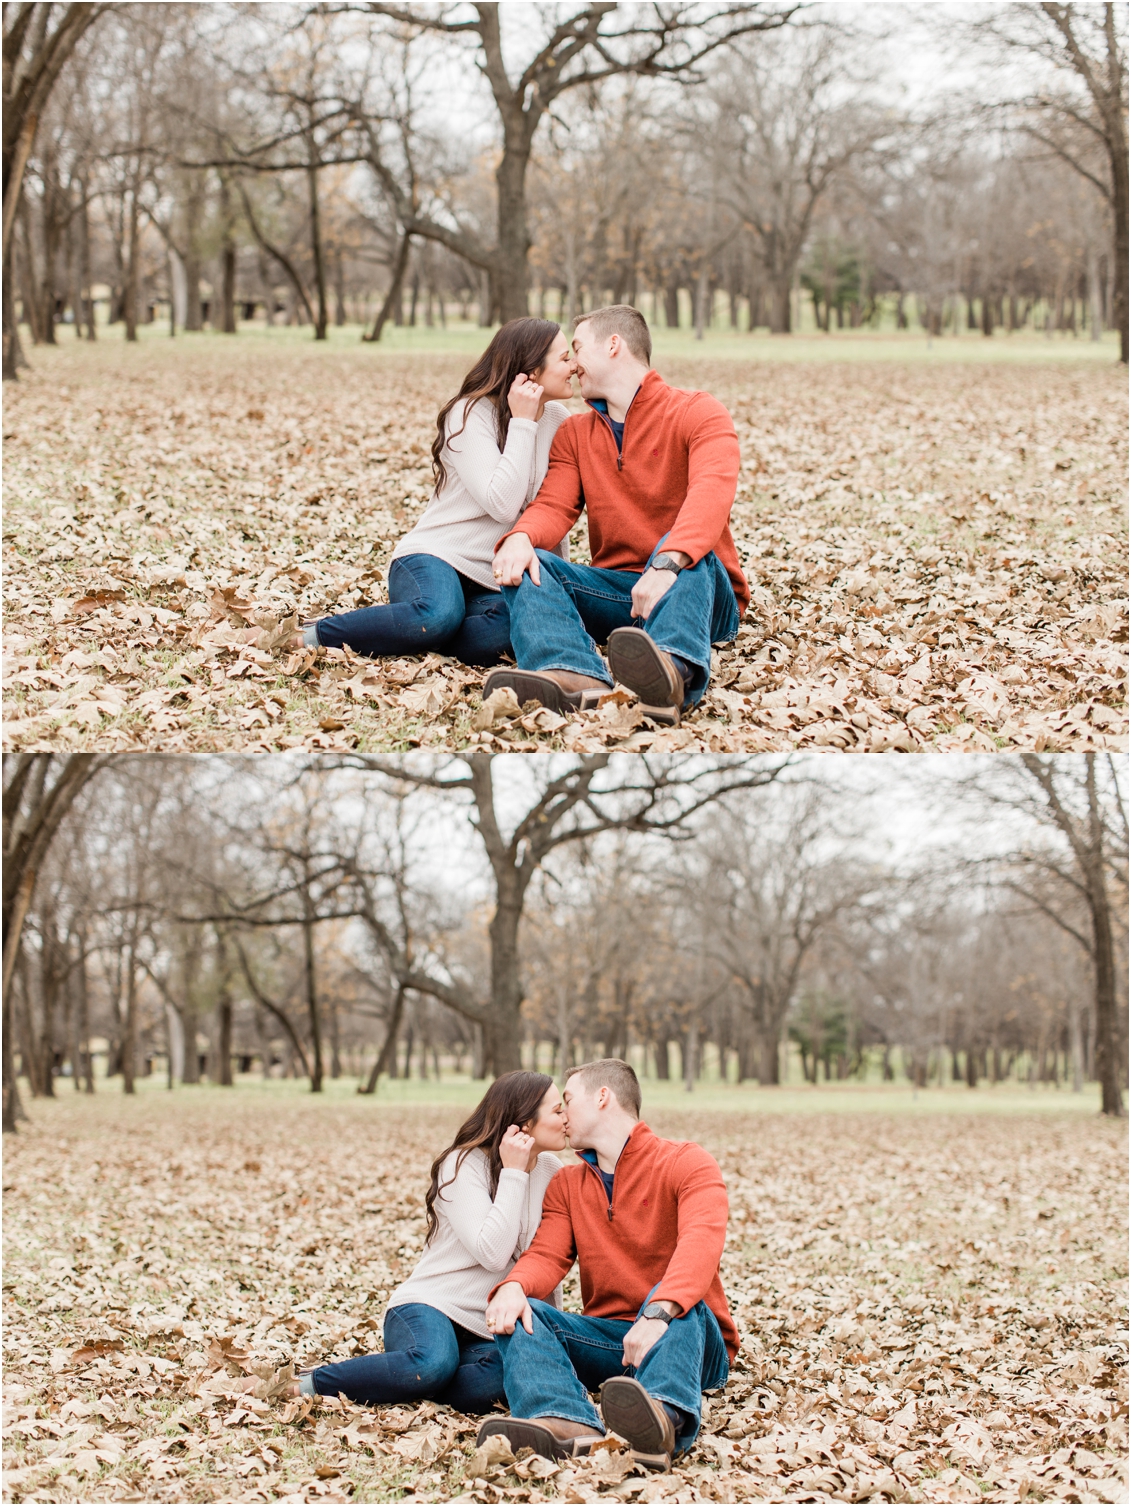 Trinity Park Engagement Session by Gaby Caskey Photography, fort worth engagement session, engagement session photos